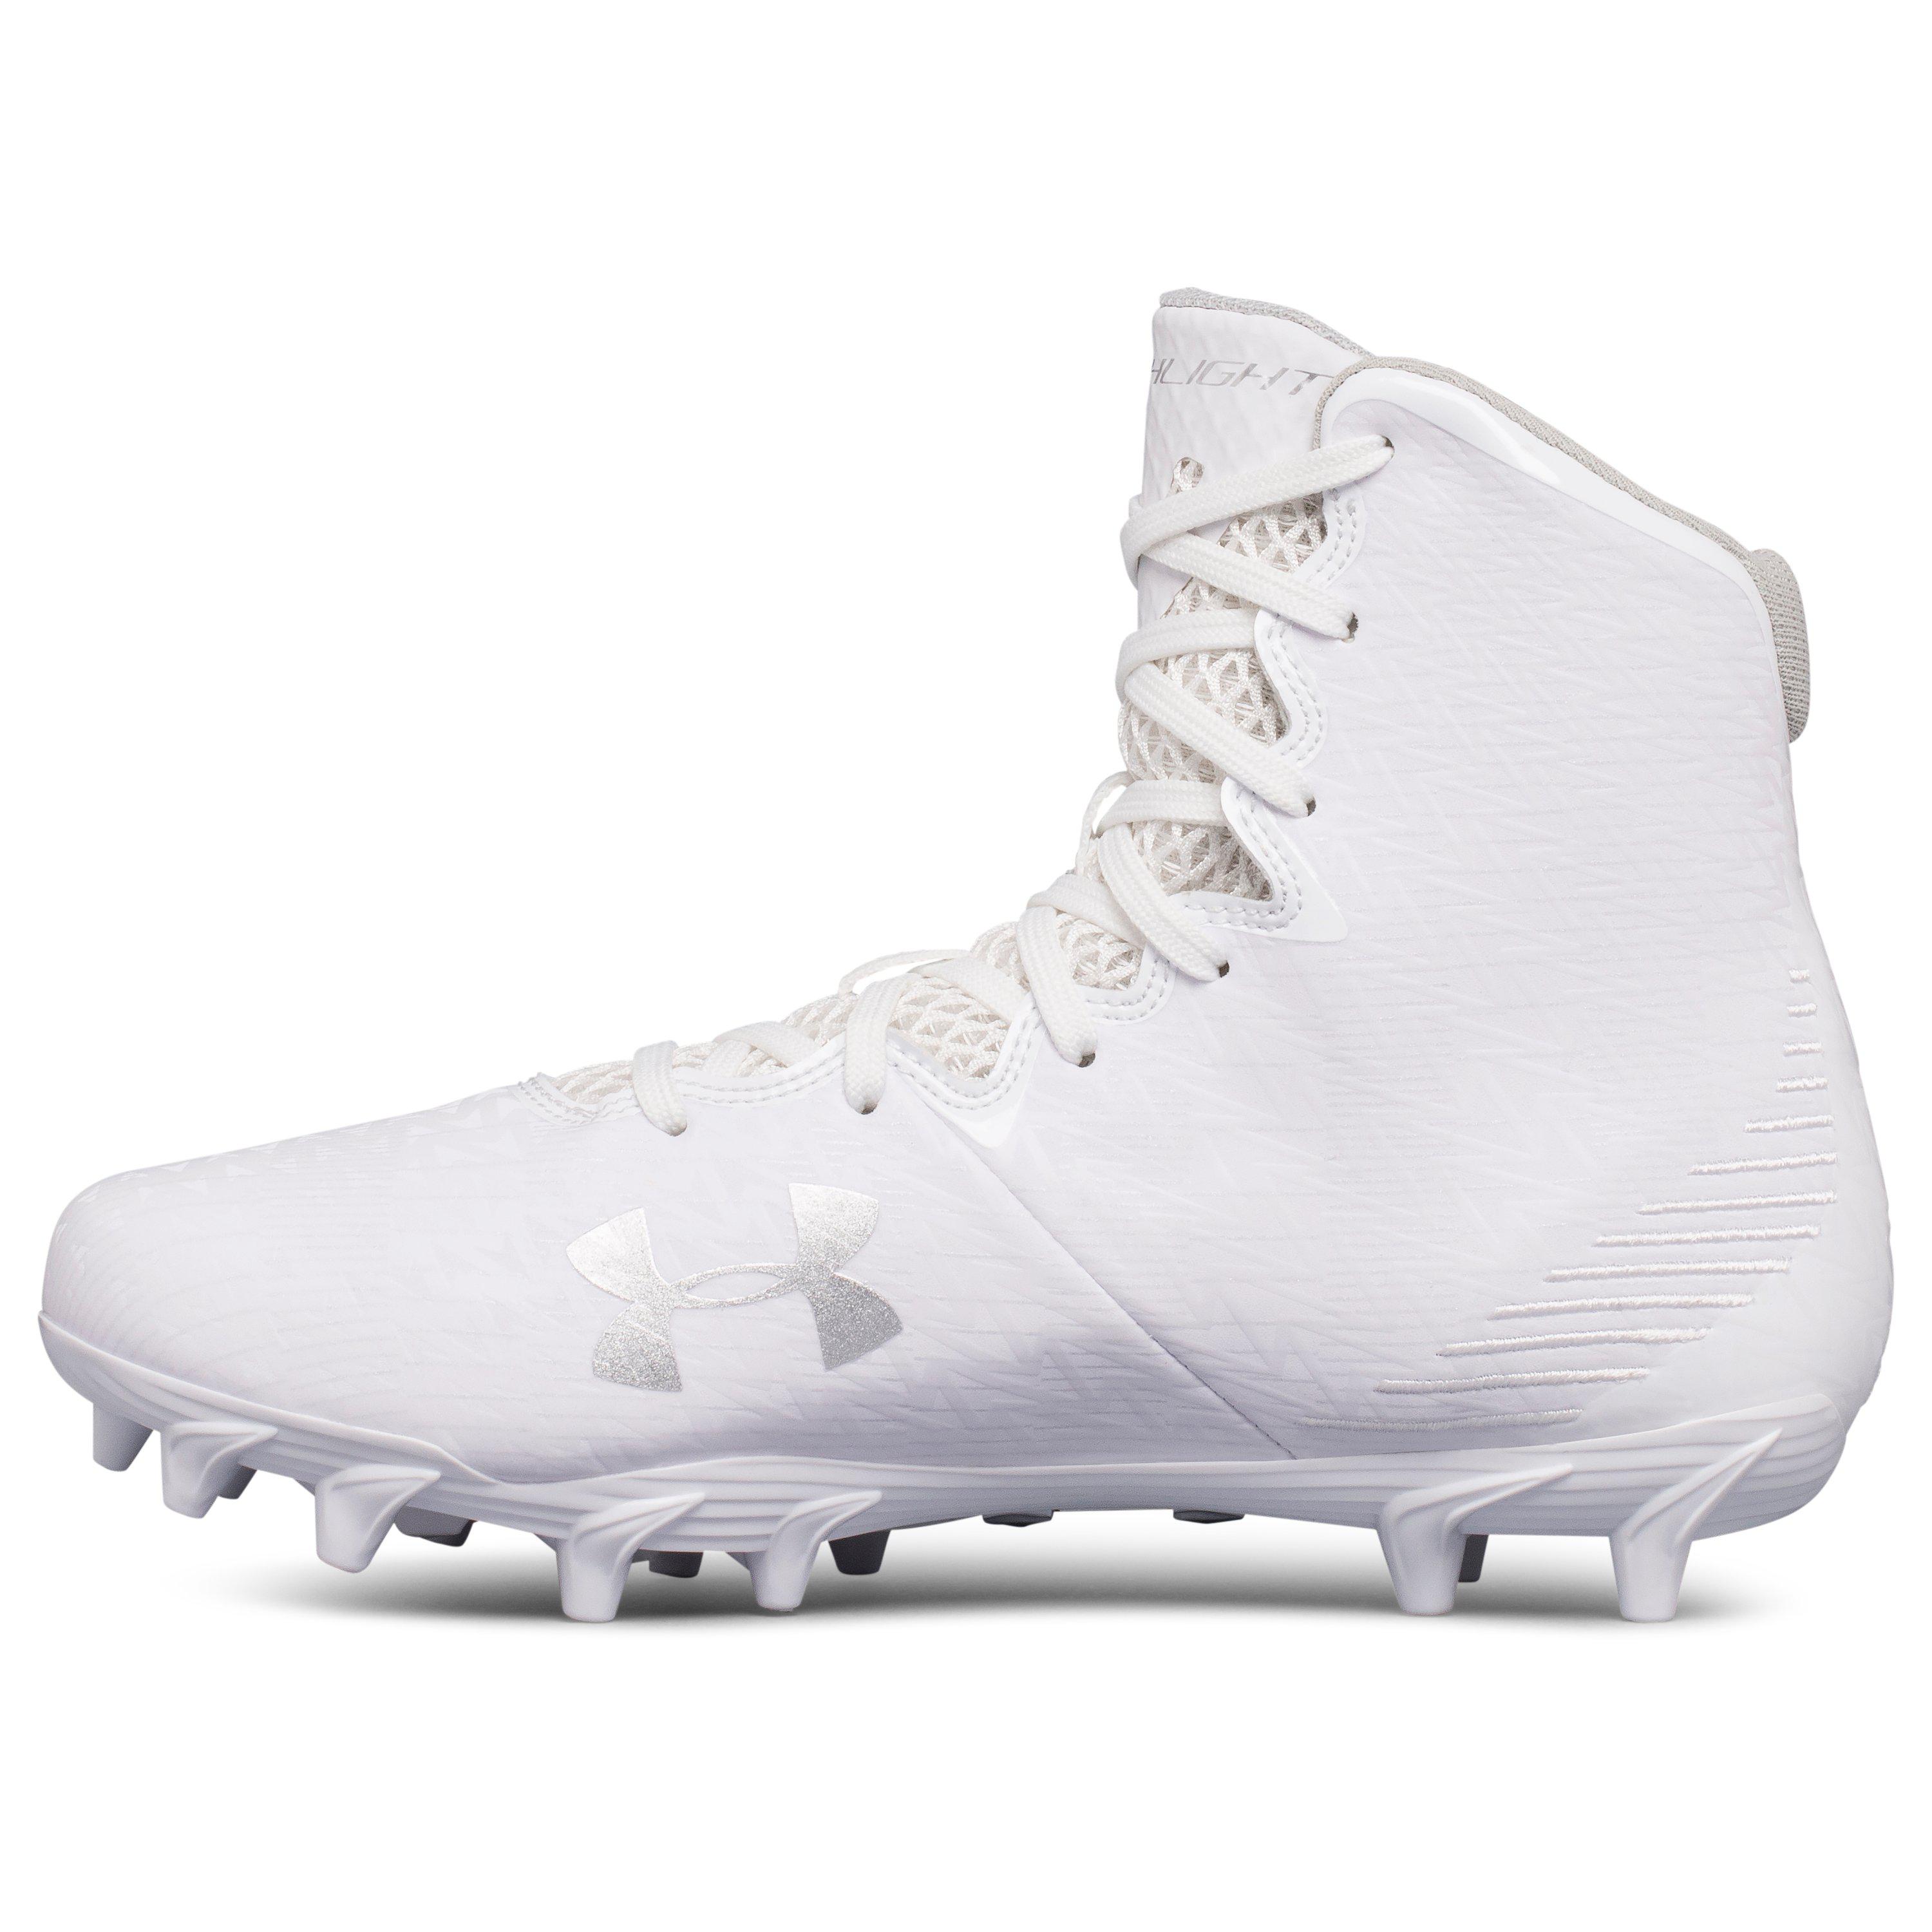 Under Armour Women's Ua Highlight Molded Lacrosse Cleats in White